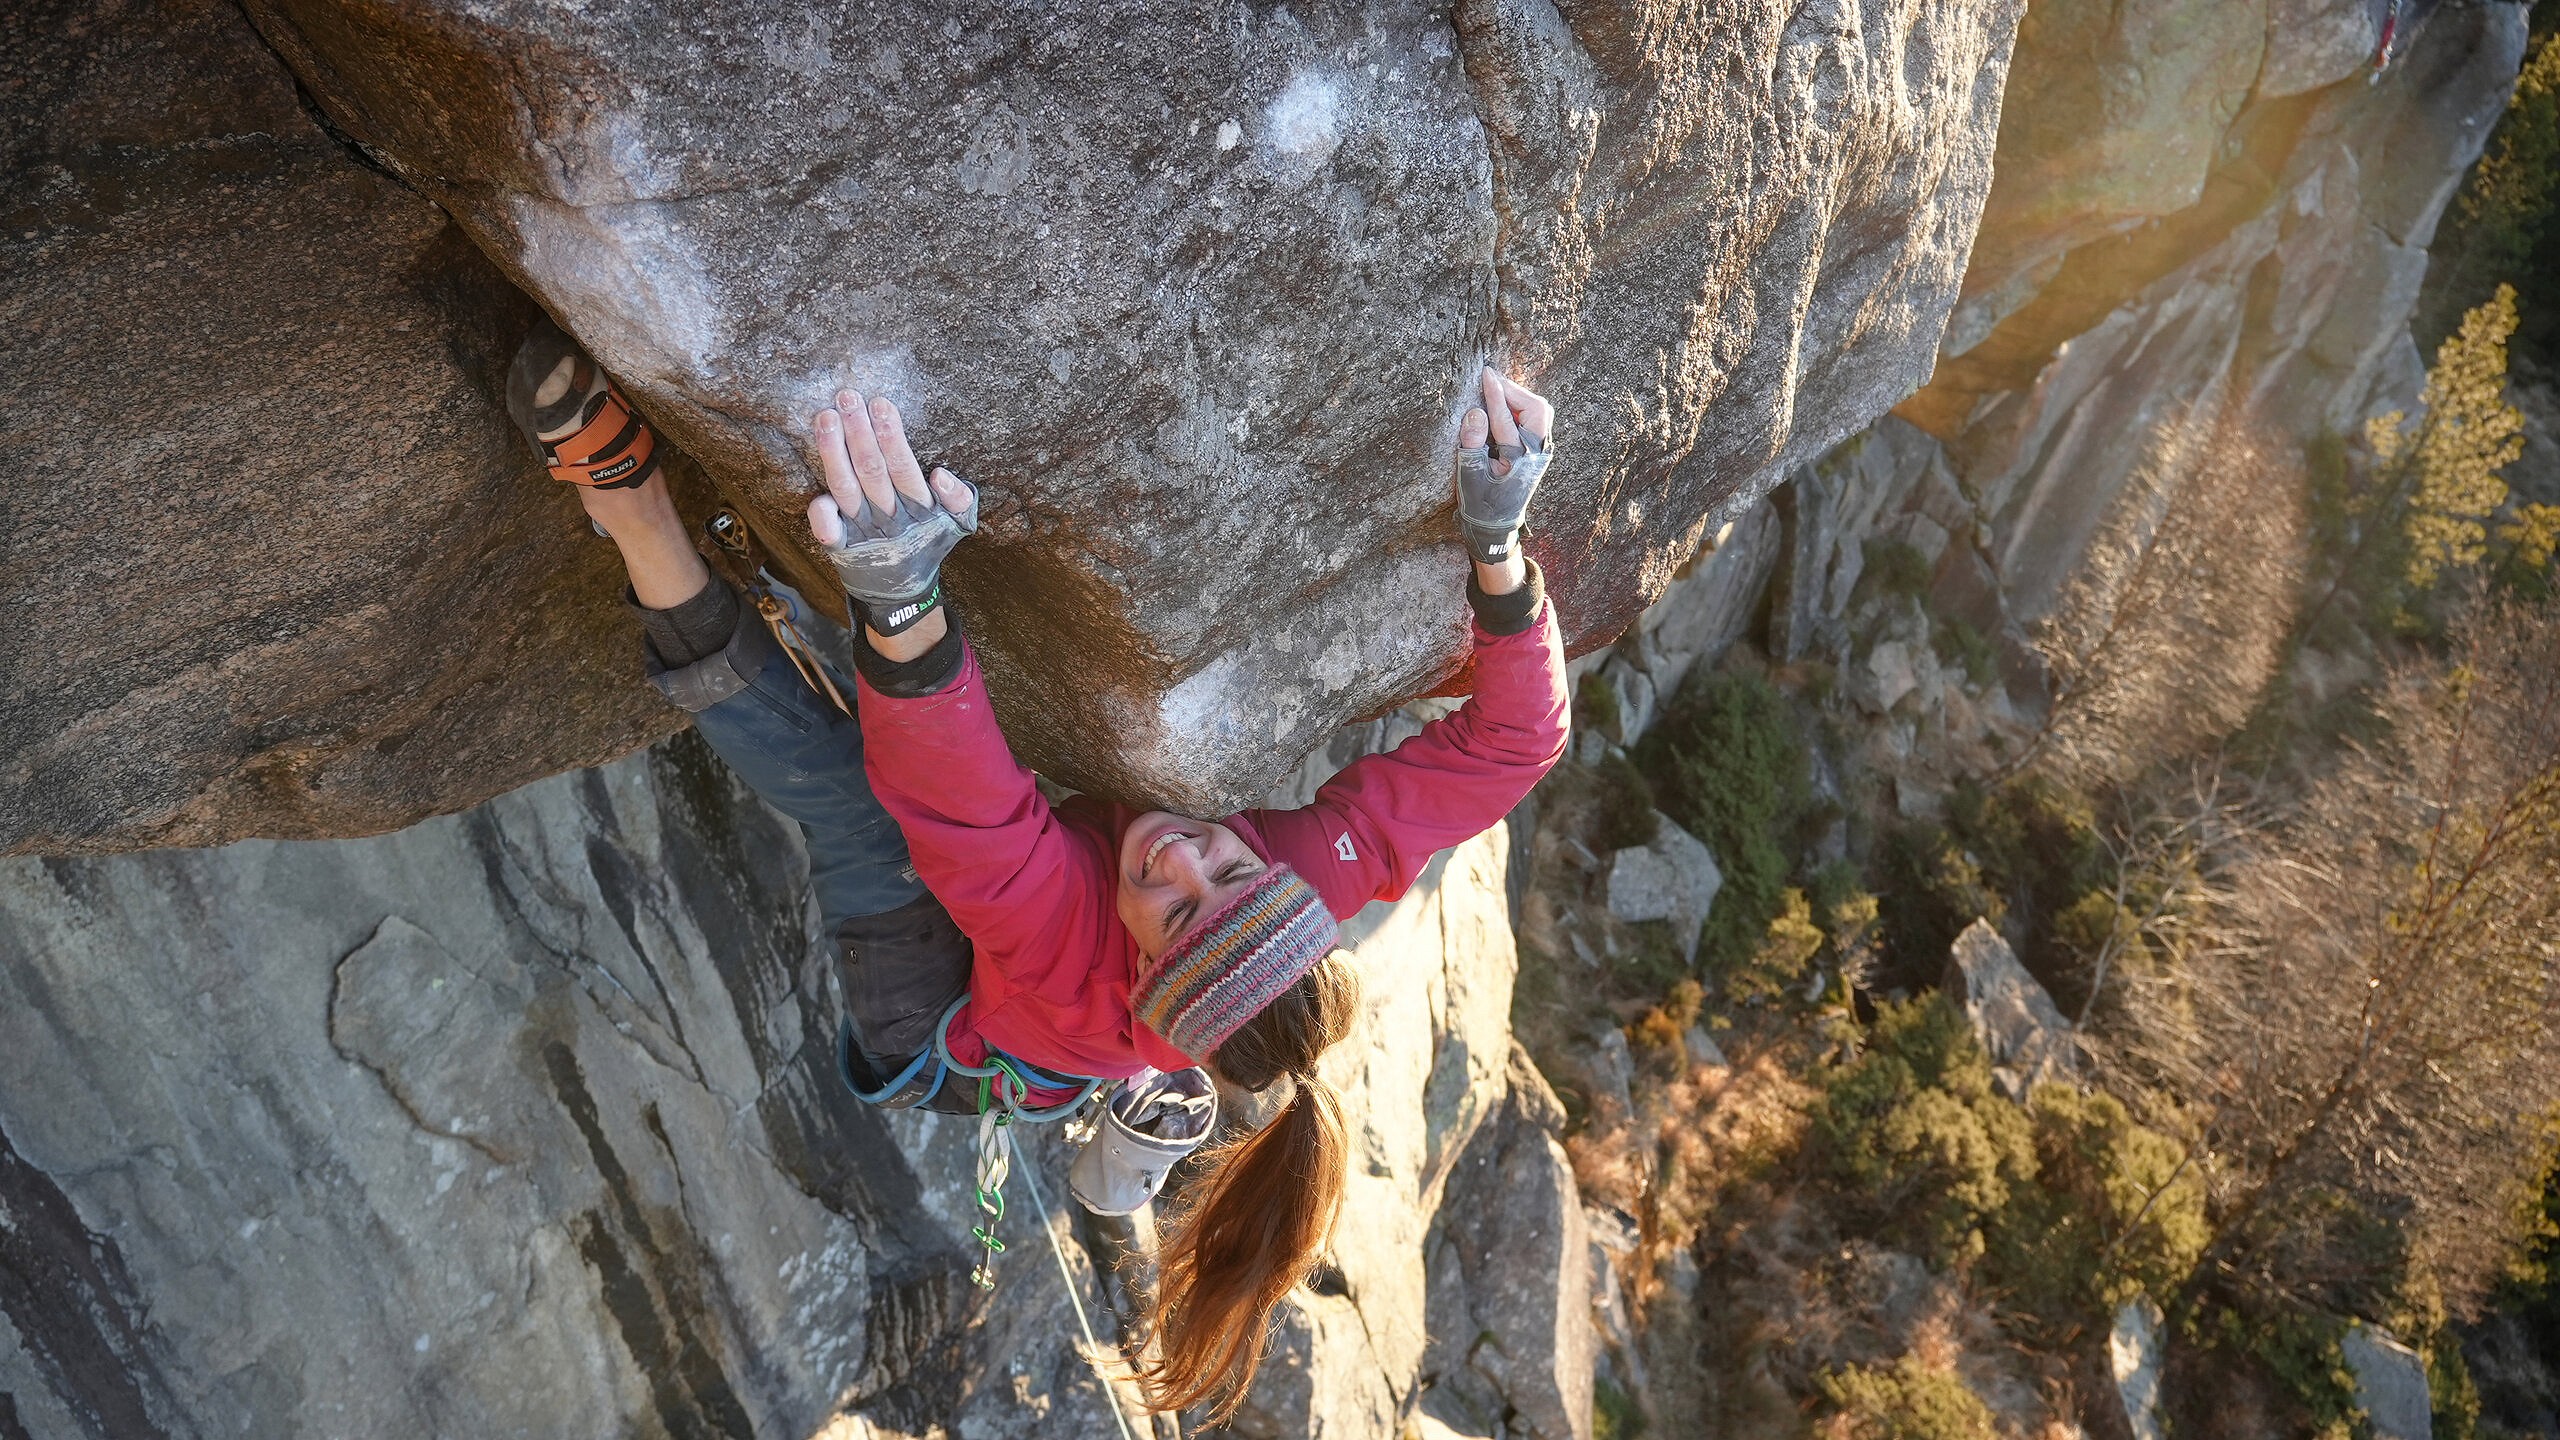 Squeezing for friction on the crux of Tazlov, 8b  © Pete Whittaker